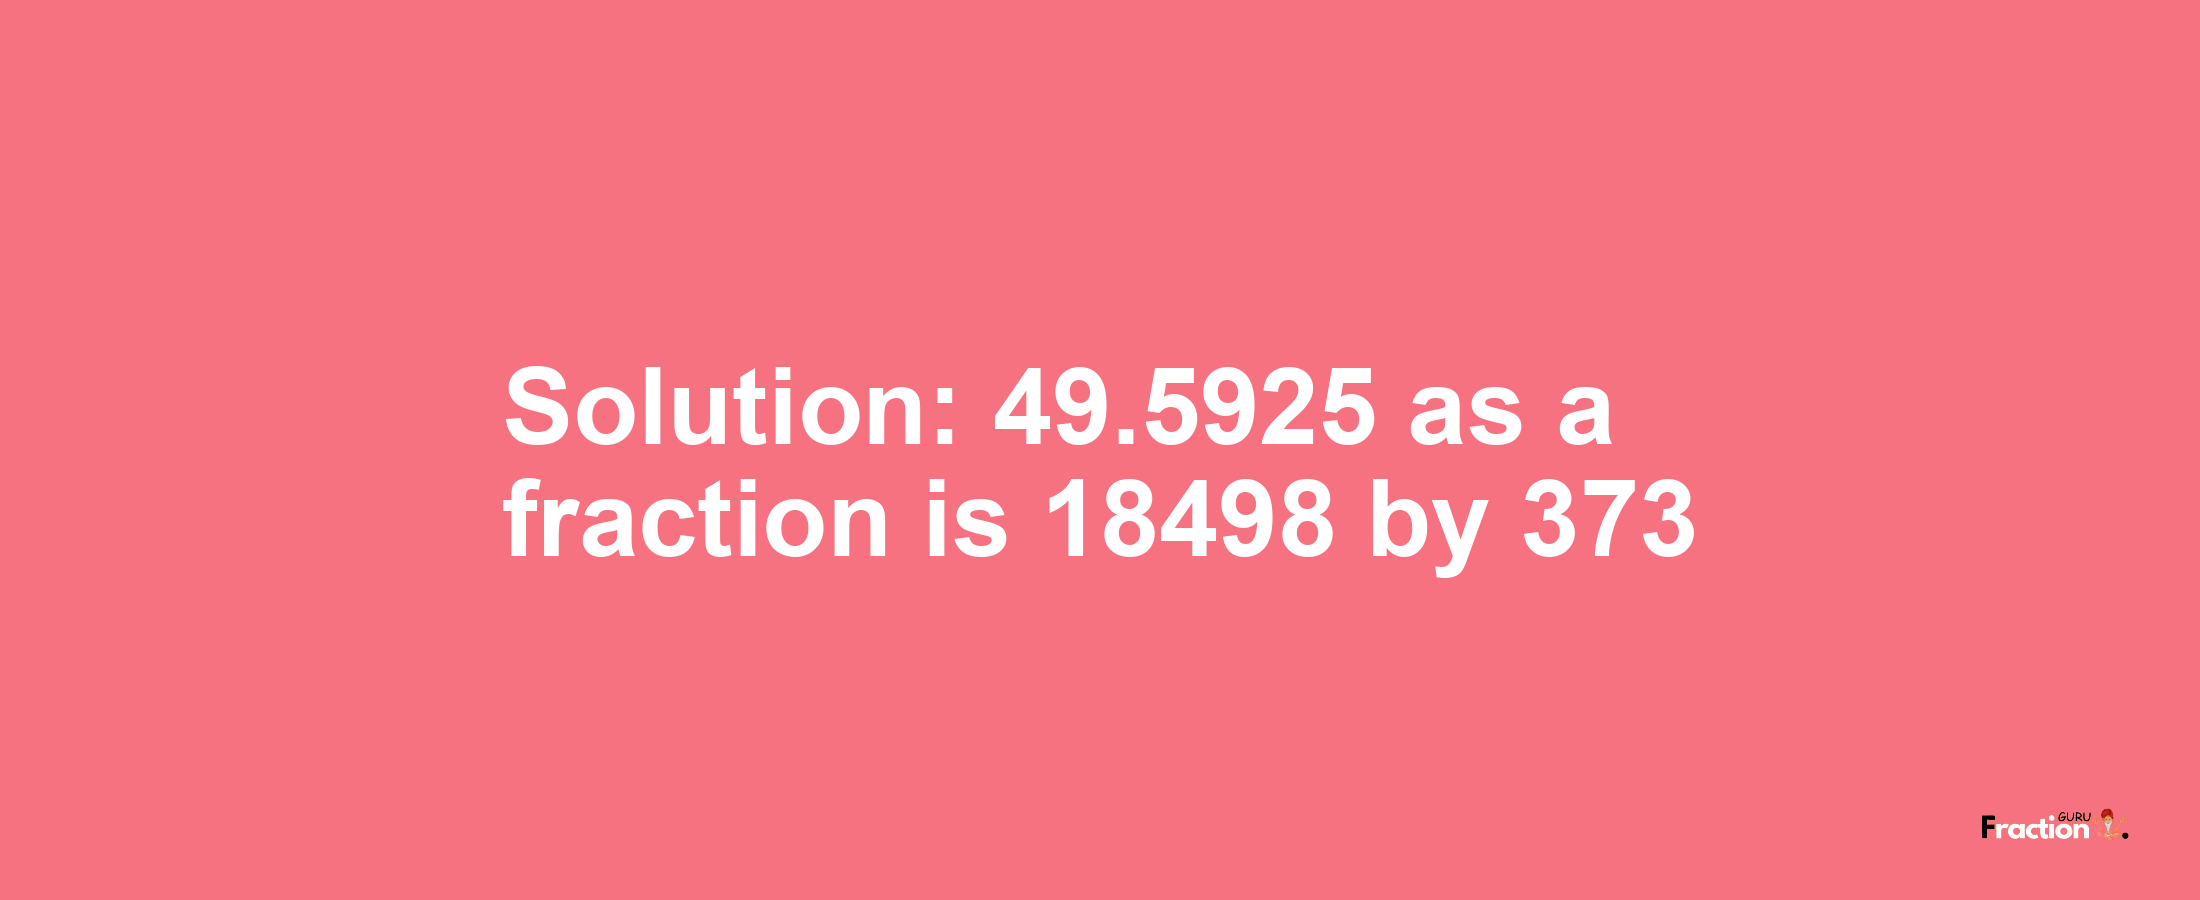 Solution:49.5925 as a fraction is 18498/373